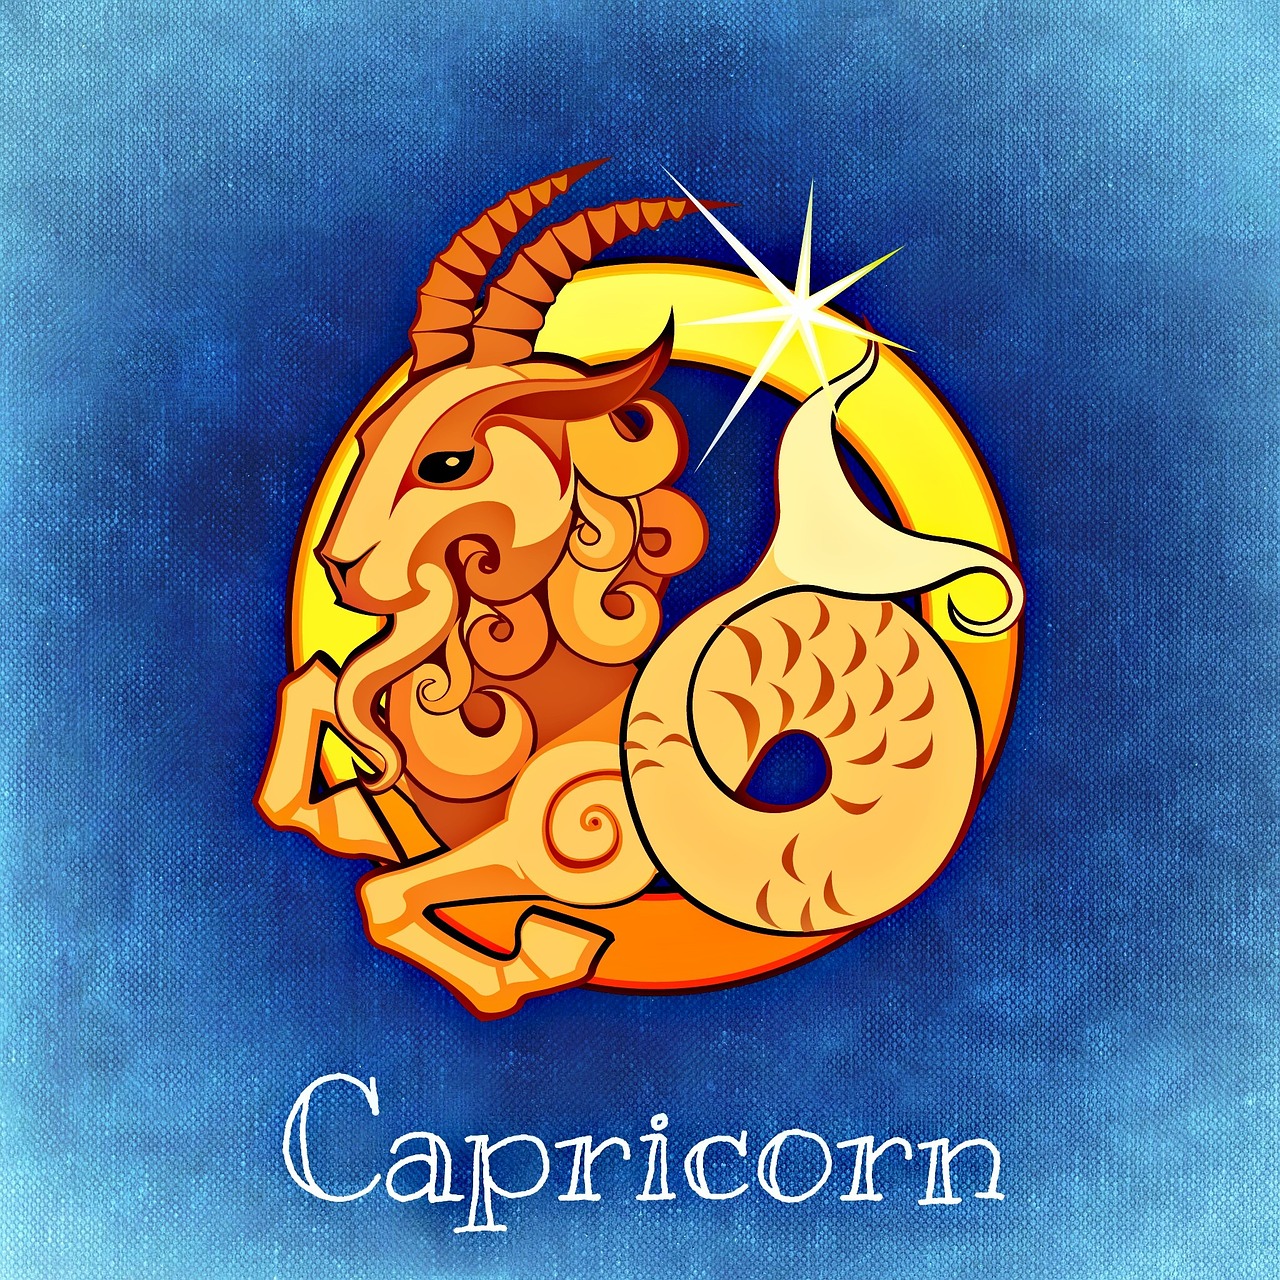 An illustration of the symbol for Capricorn zodiac sign.